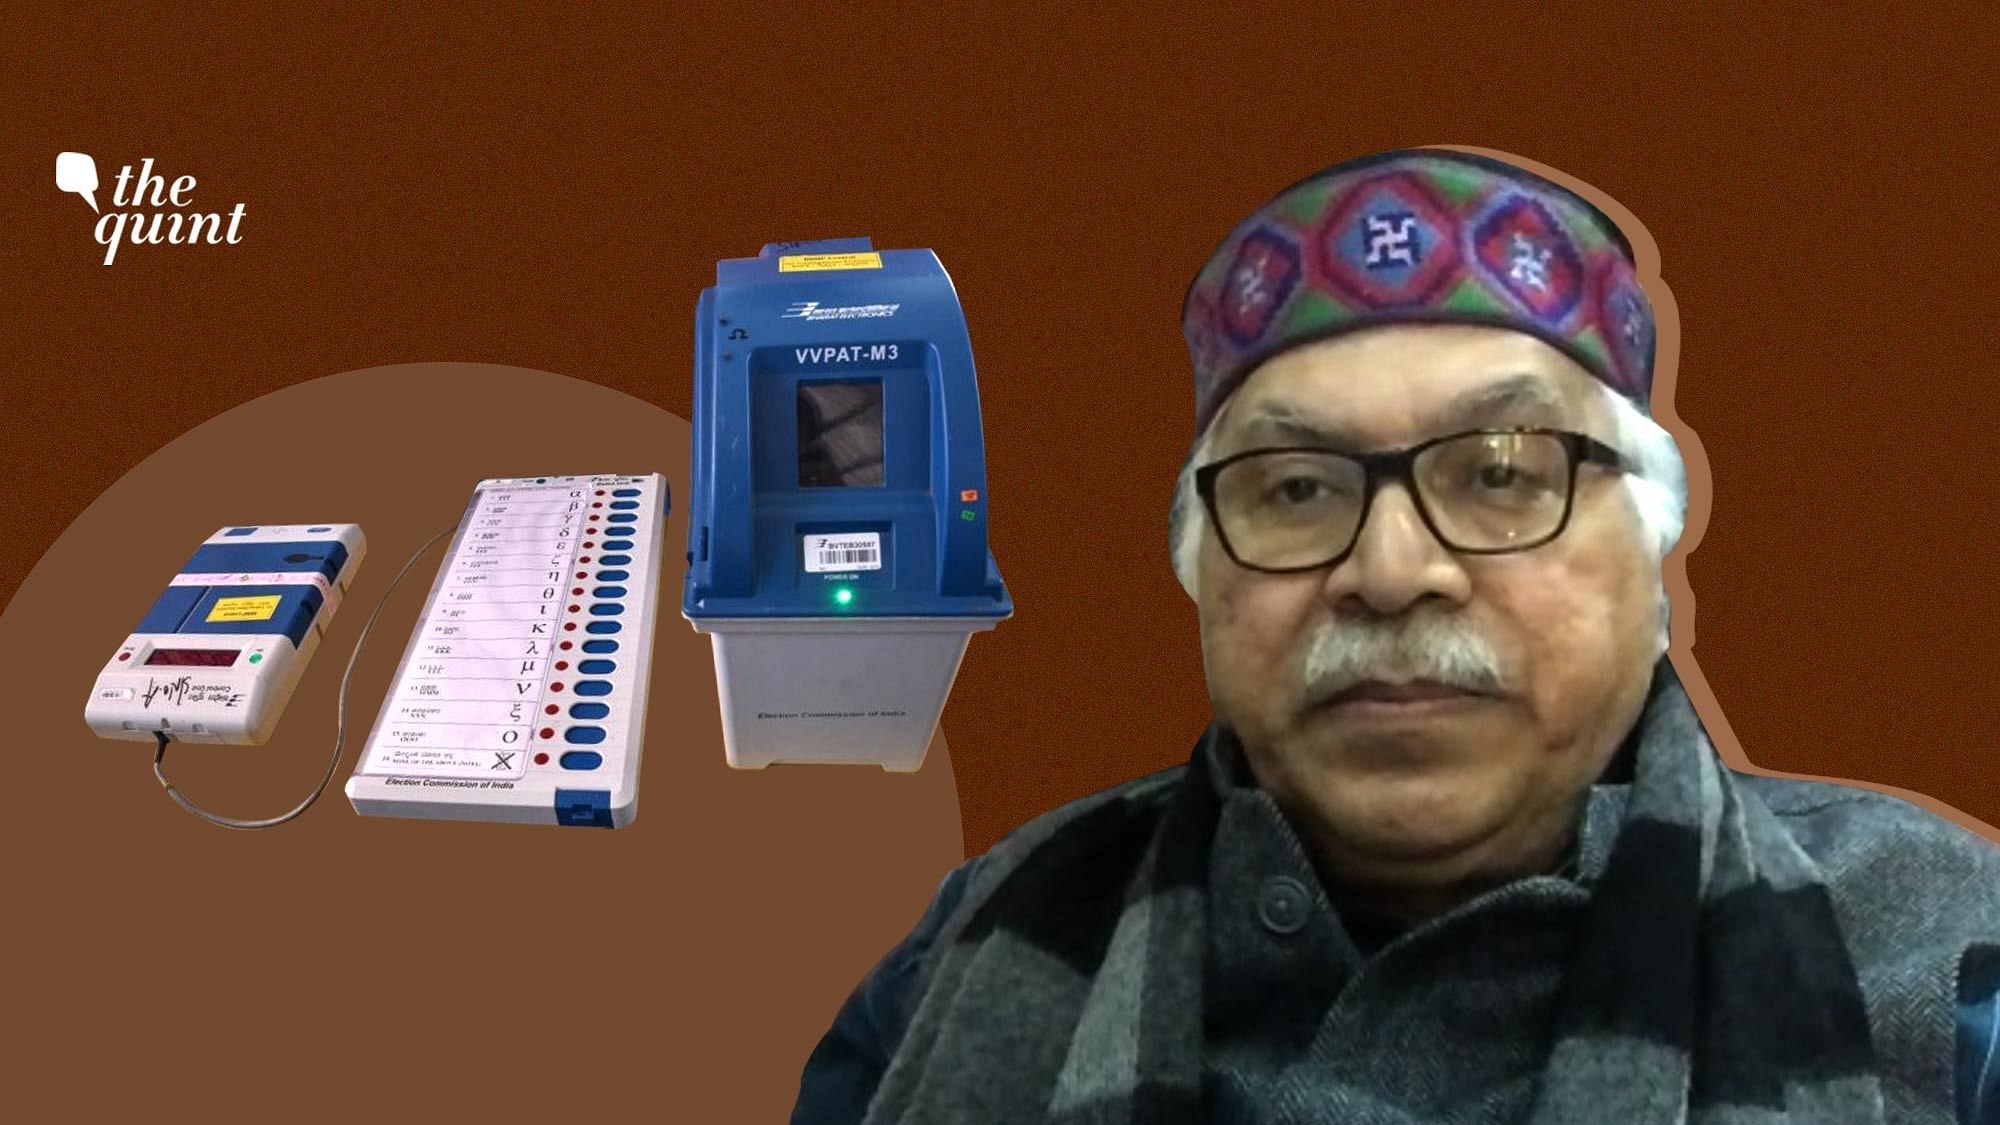 In an interview to The Quint, former chief election commissioner SY Quraishi answers some pertinent questions related to EVM-VVPAT controversies. He emphasised that Election Commission should clarify doubts raised on vulnerabilities of EVM-VVPAT.&nbsp;